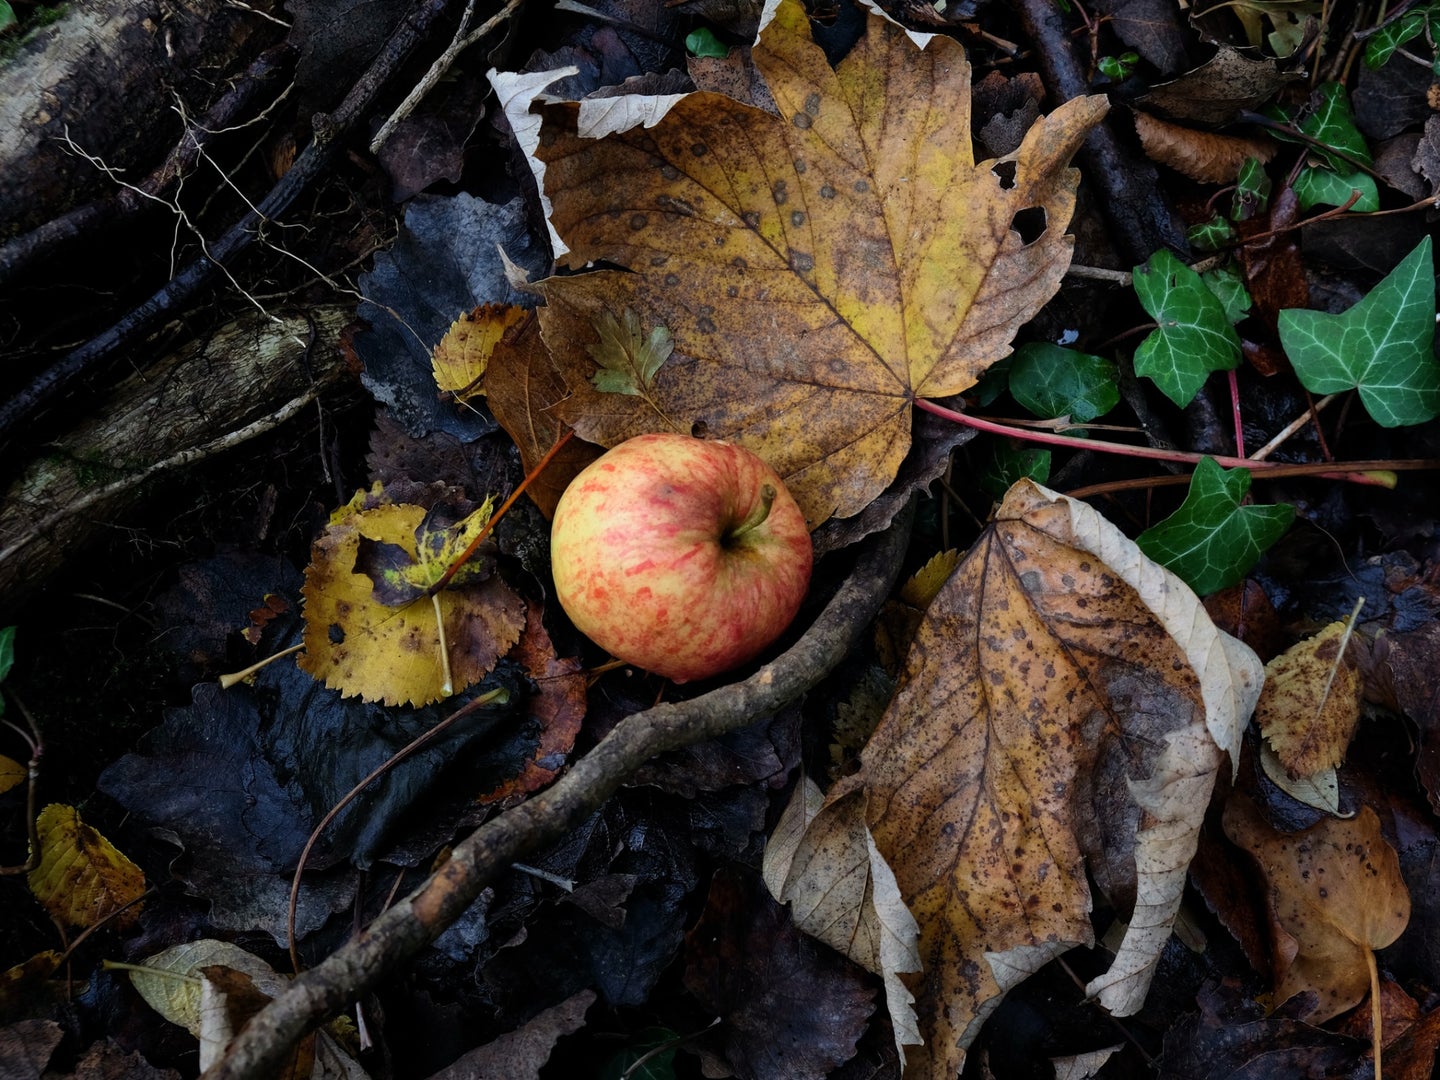 An apple on the ground in the forest, surrounded by fallen leaves.